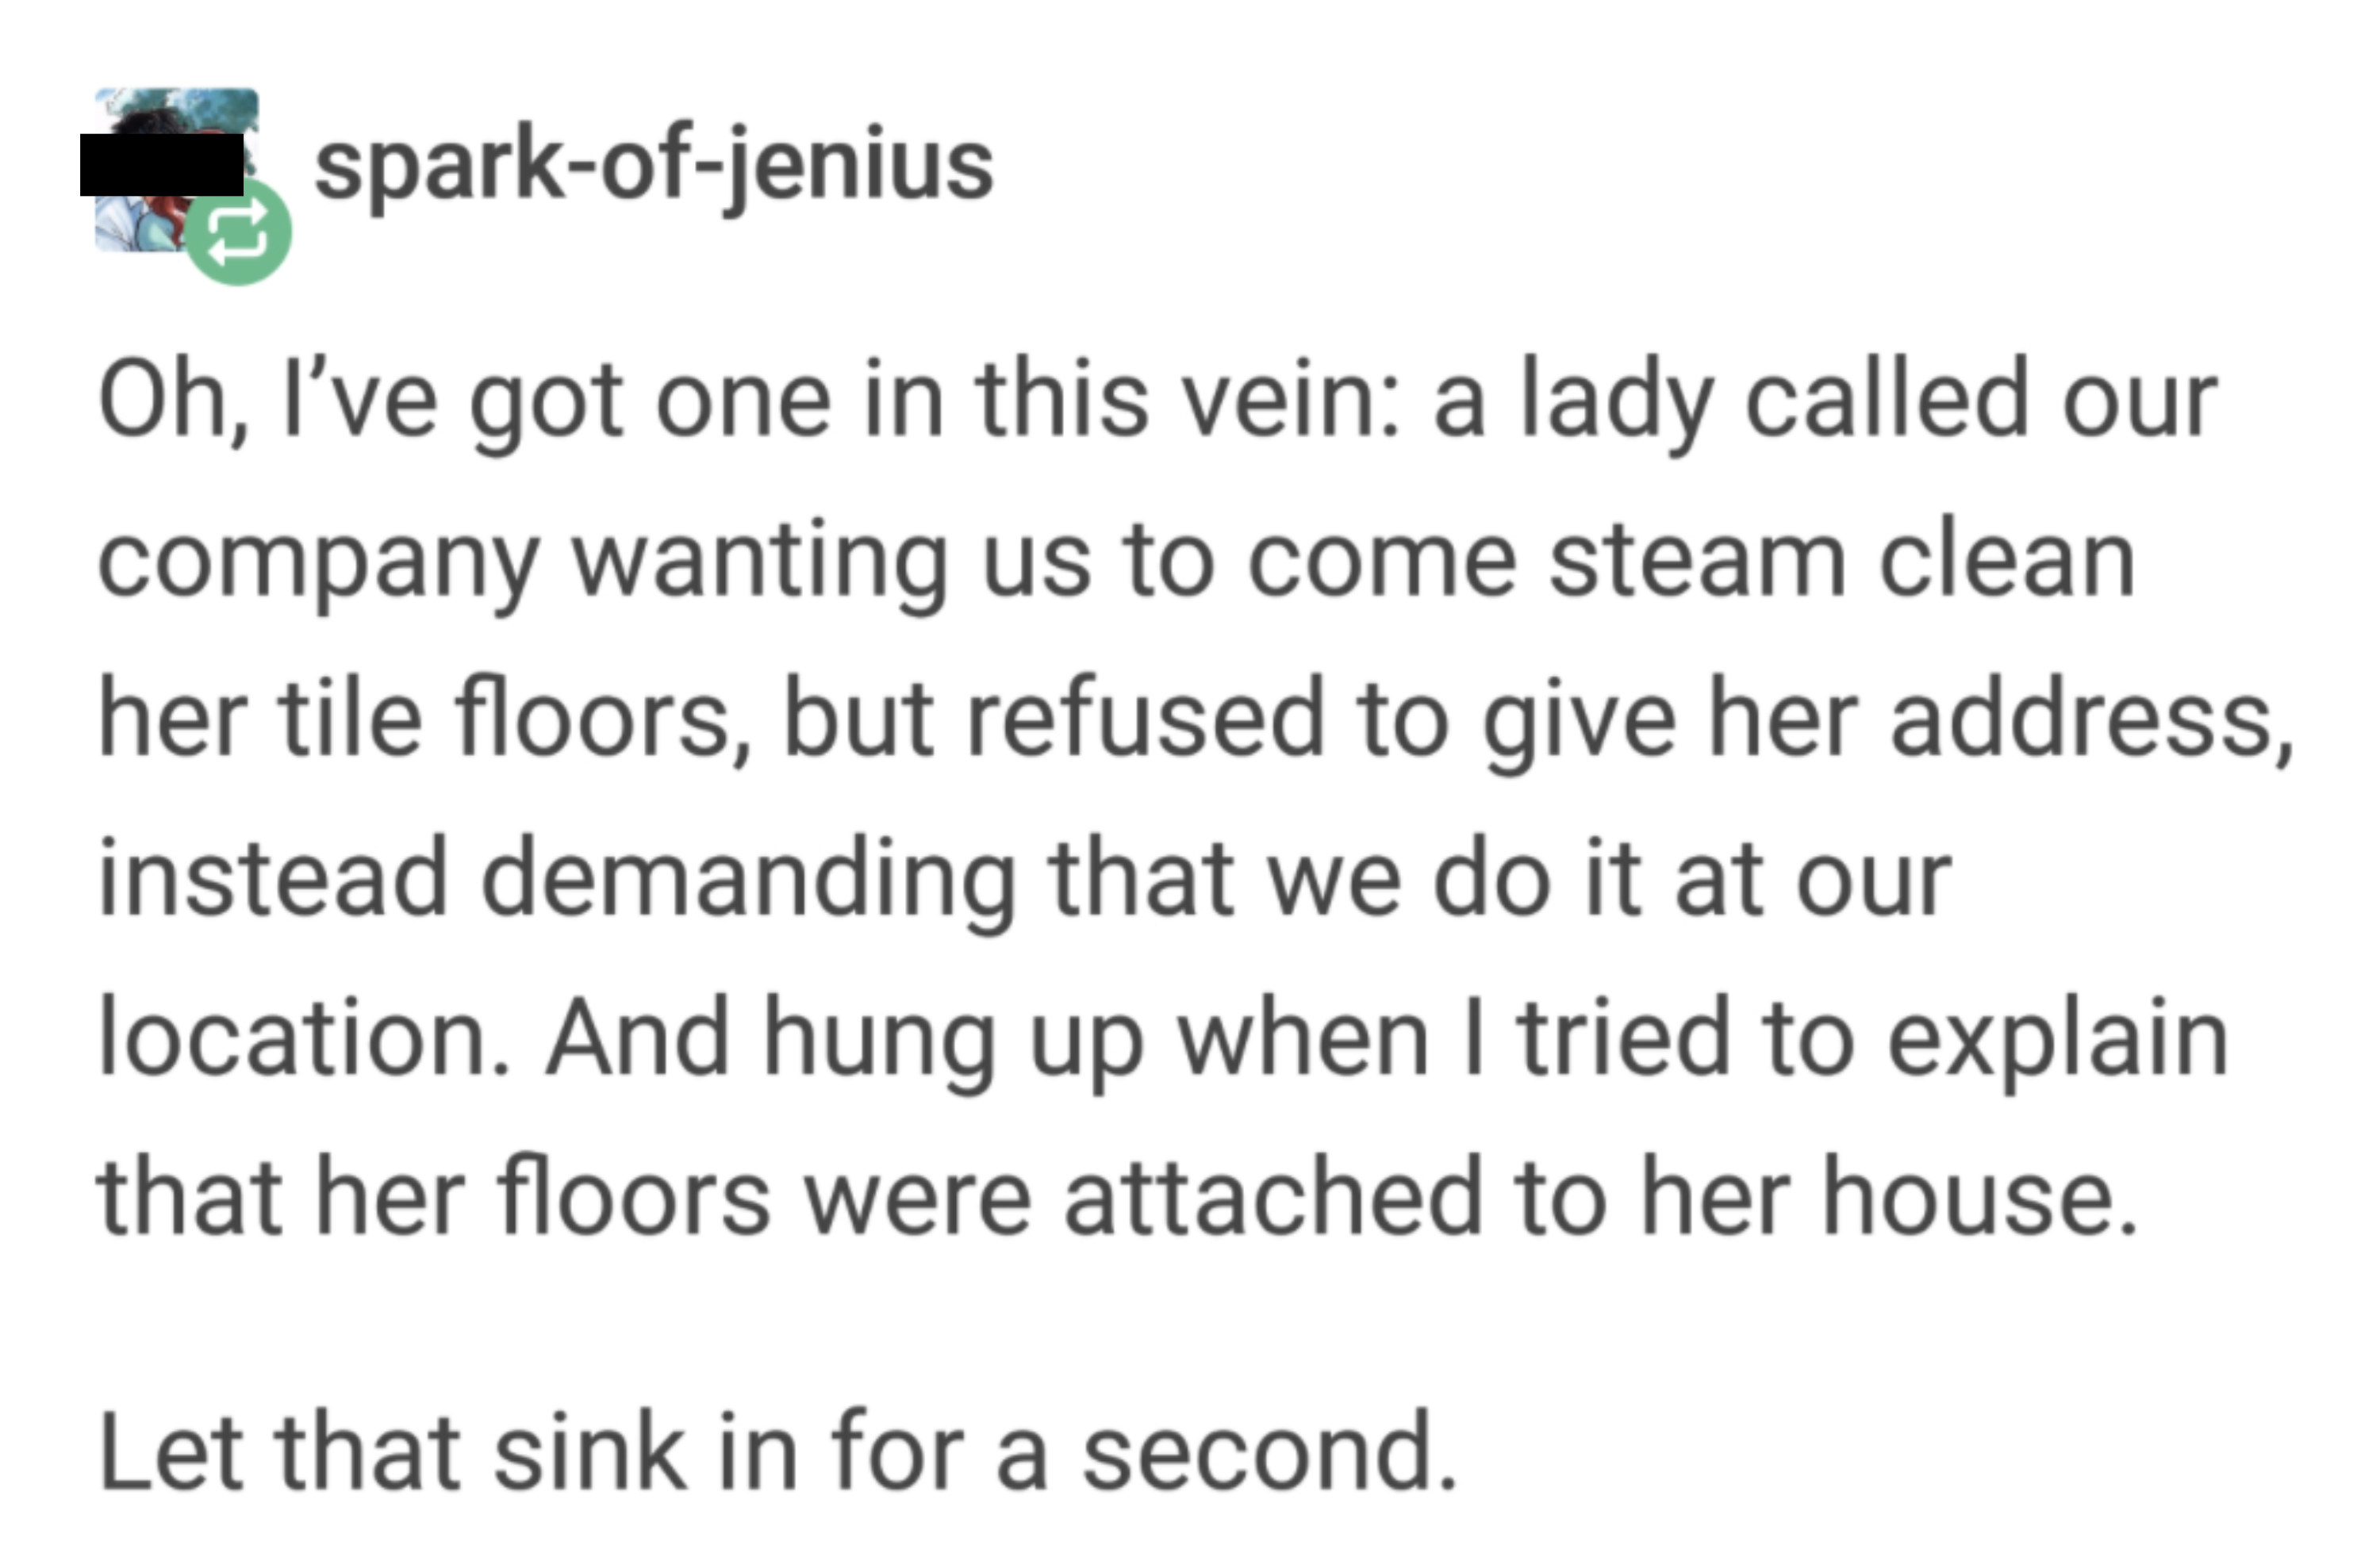 story about someone who doesn&#x27;t understand they can&#x27;t just get their tiles cleaned remotely